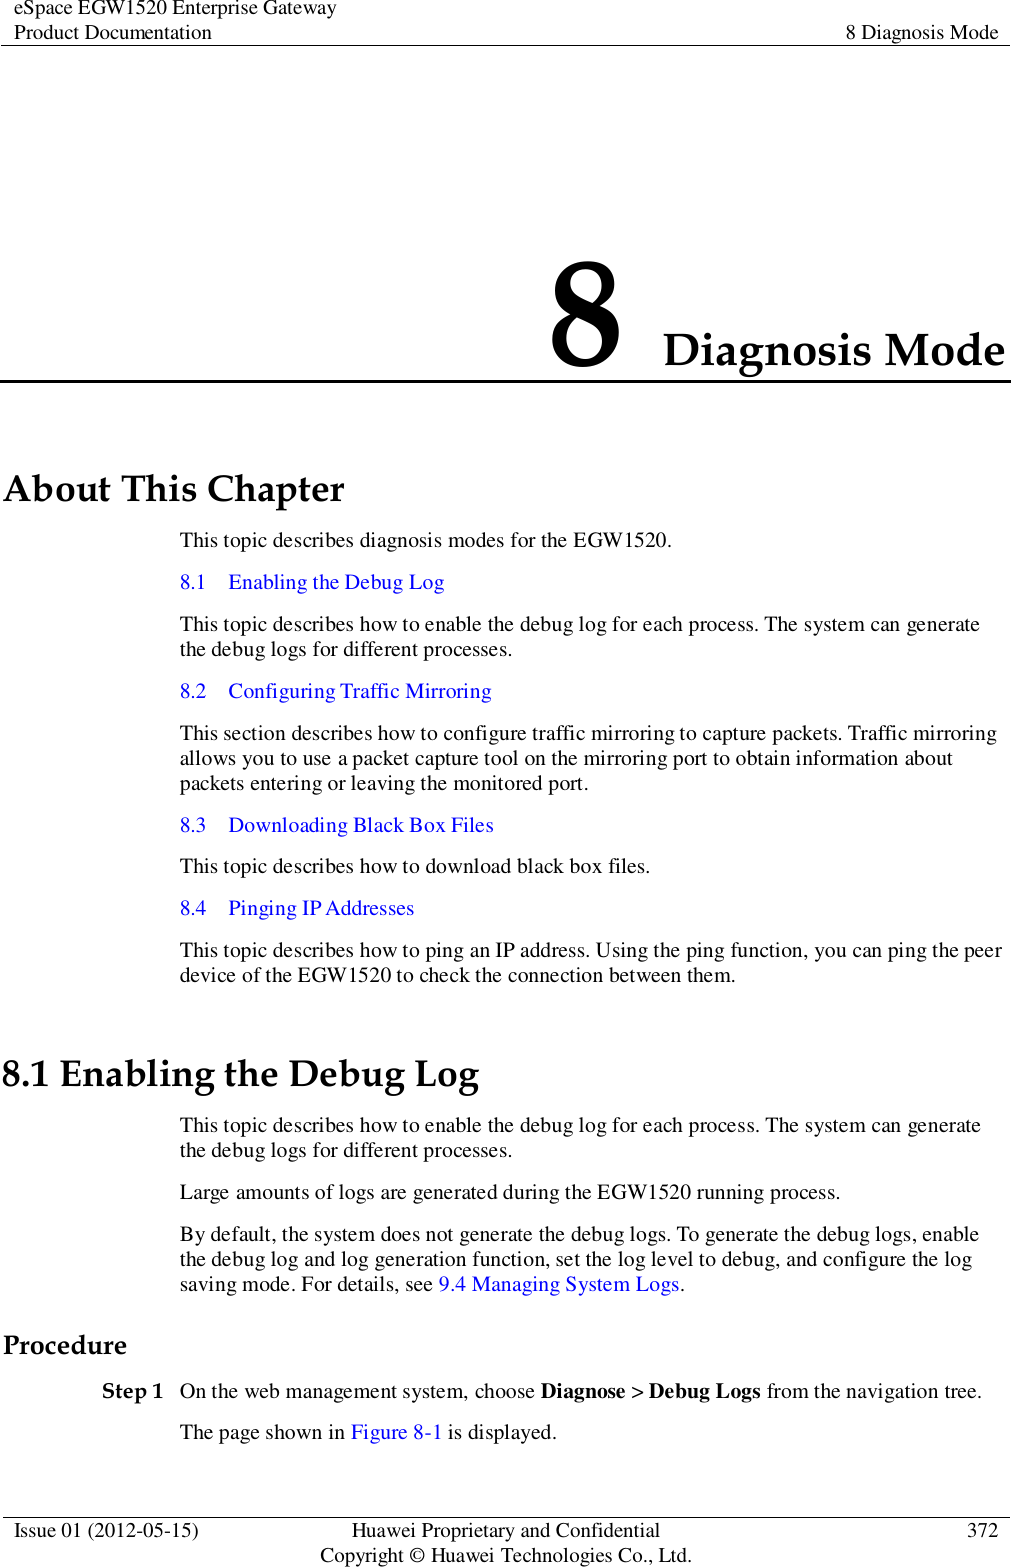 eSpace EGW1520 Enterprise Gateway Product Documentation 8 Diagnosis Mode  Issue 01 (2012-05-15) Huawei Proprietary and Confidential                                     Copyright © Huawei Technologies Co., Ltd. 372  8 Diagnosis Mode About This Chapter This topic describes diagnosis modes for the EGW1520.   8.1    Enabling the Debug Log This topic describes how to enable the debug log for each process. The system can generate the debug logs for different processes. 8.2    Configuring Traffic Mirroring This section describes how to configure traffic mirroring to capture packets. Traffic mirroring allows you to use a packet capture tool on the mirroring port to obtain information about packets entering or leaving the monitored port. 8.3    Downloading Black Box Files This topic describes how to download black box files. 8.4    Pinging IP Addresses This topic describes how to ping an IP address. Using the ping function, you can ping the peer device of the EGW1520 to check the connection between them. 8.1 Enabling the Debug Log This topic describes how to enable the debug log for each process. The system can generate the debug logs for different processes. Large amounts of logs are generated during the EGW1520 running process. By default, the system does not generate the debug logs. To generate the debug logs, enable the debug log and log generation function, set the log level to debug, and configure the log saving mode. For details, see 9.4 Managing System Logs. Procedure Step 1 On the web management system, choose Diagnose &gt; Debug Logs from the navigation tree. The page shown in Figure 8-1 is displayed. 